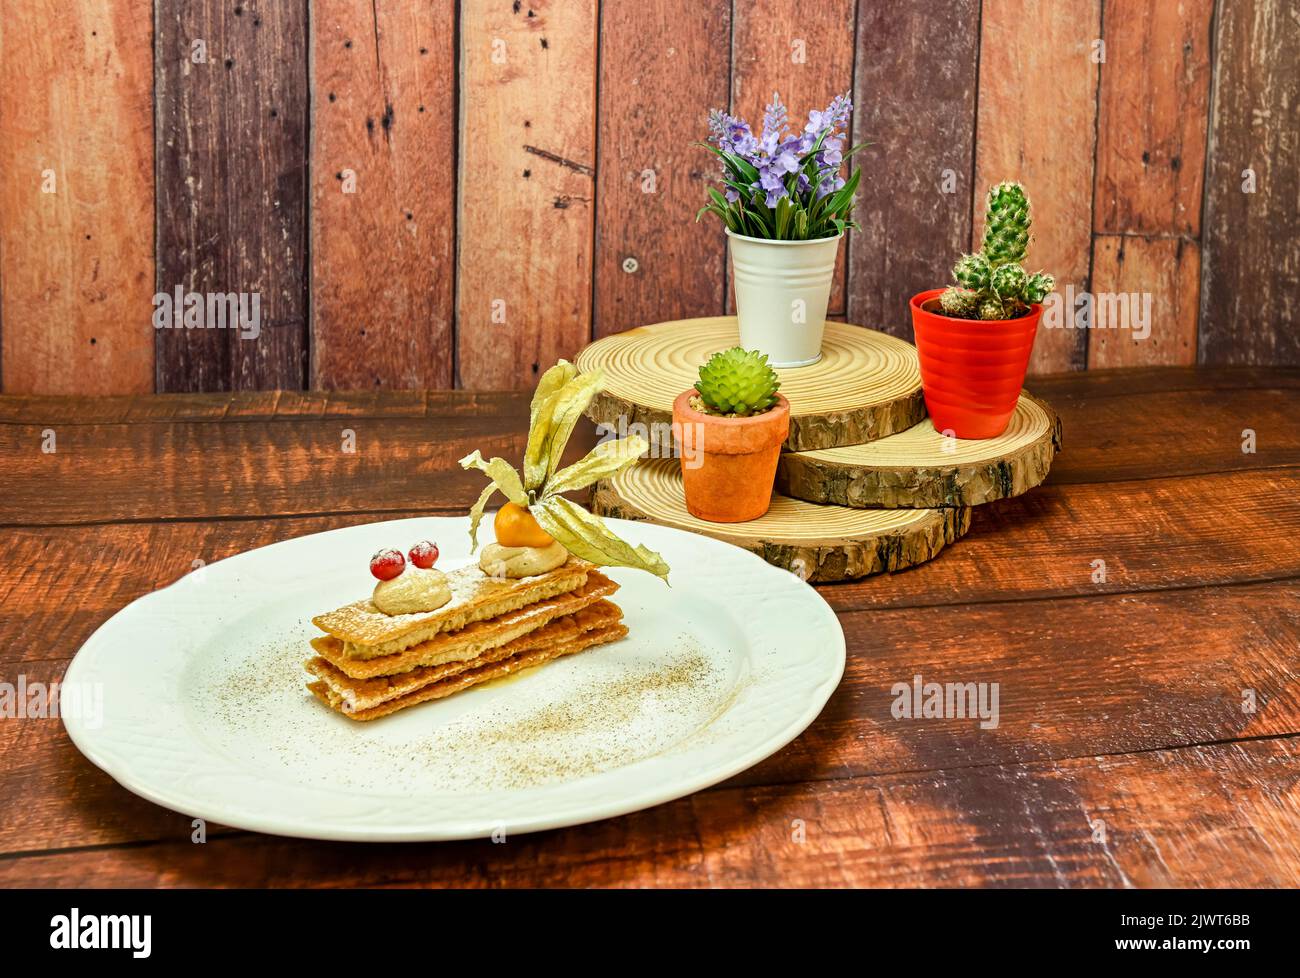 Crunchy inverted puff pastry mille-feuille with caramel and toffee mousse. Stock Photo